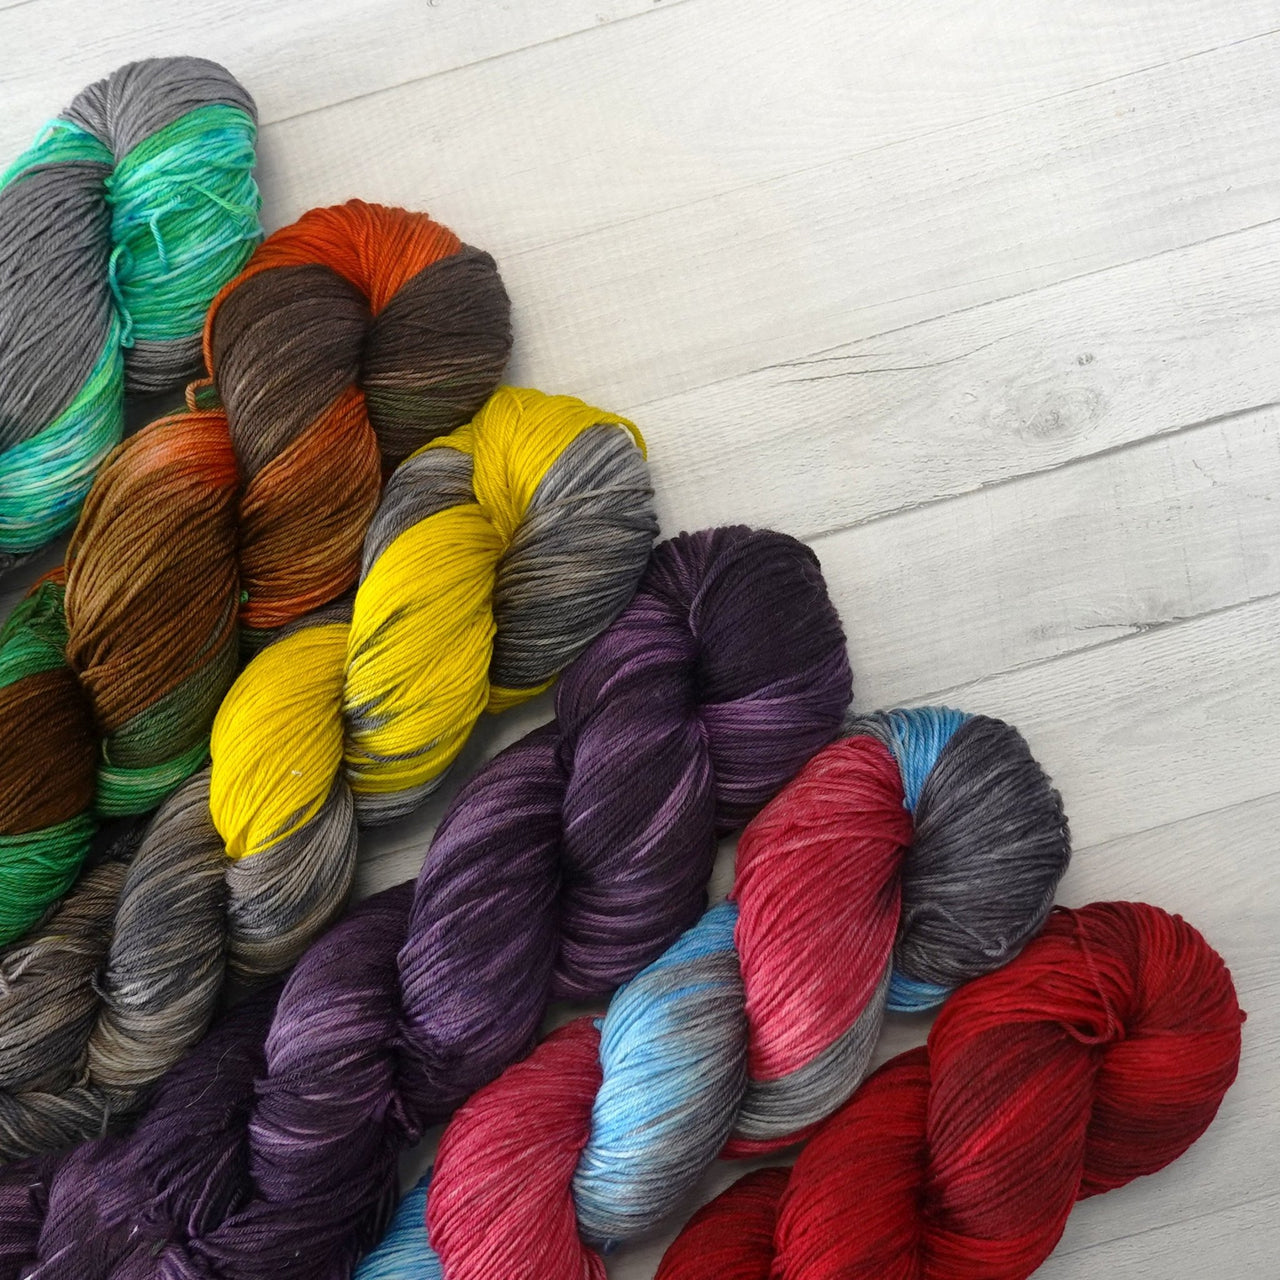 Shop Update - January 29th - GotG | The Woolly Dragon